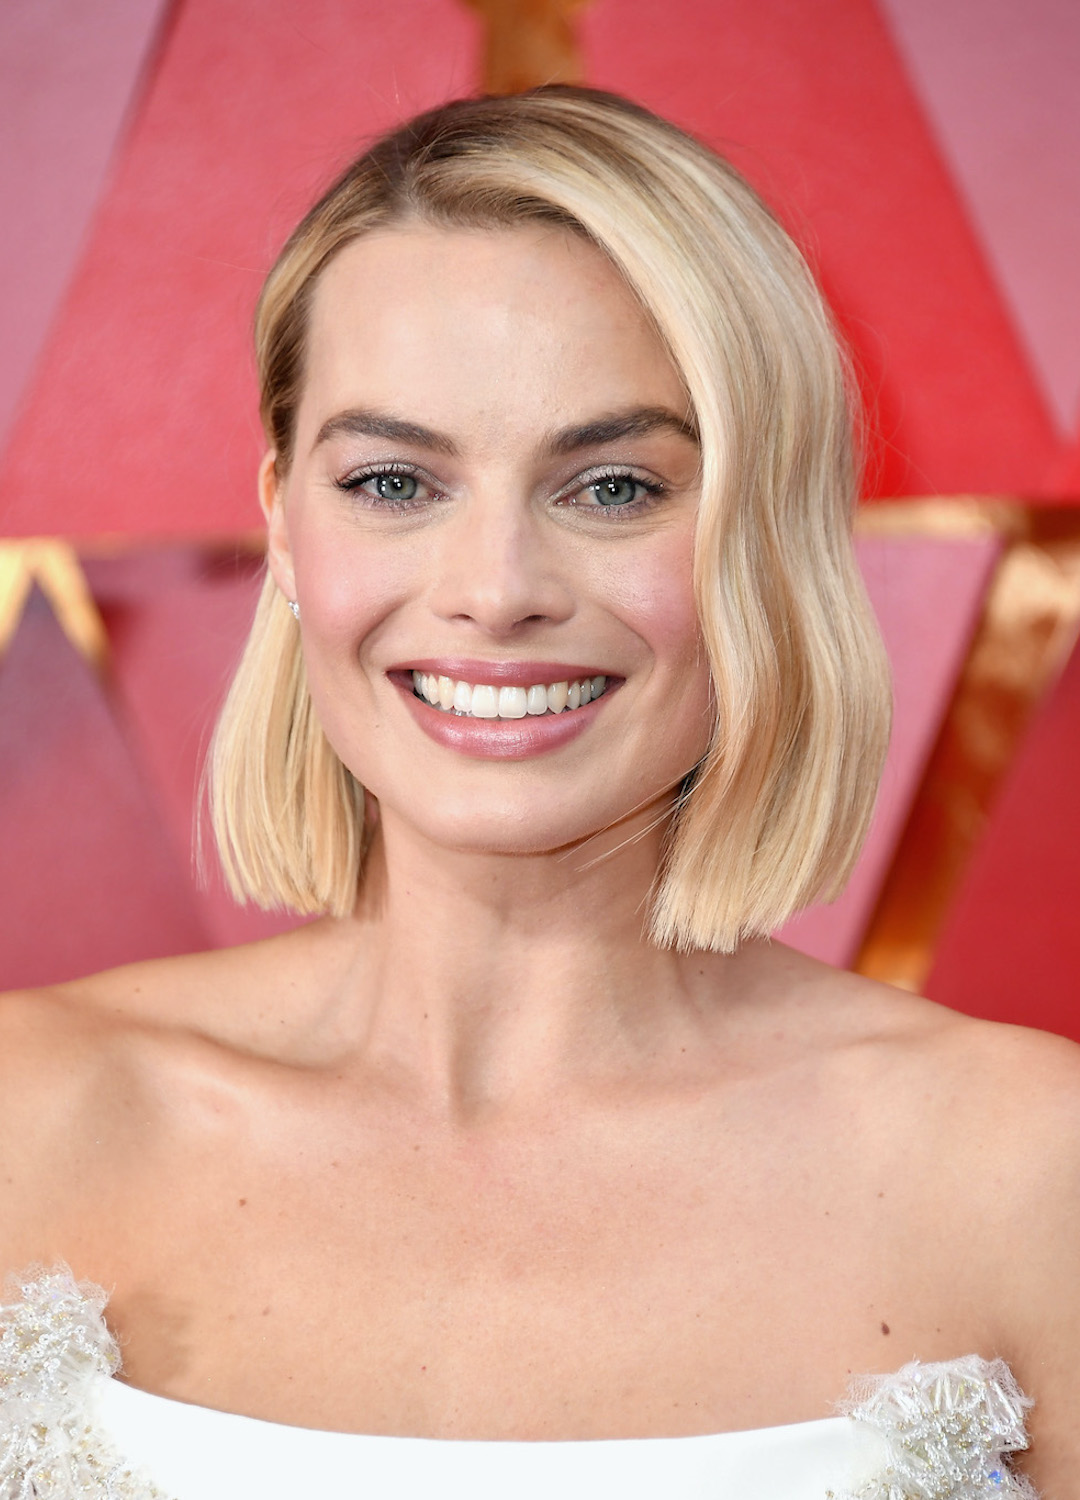 Margot Robbie attends the 90th Annual Academy Awards at Hollywood & Highland Center on March 4, 2018 in Hollywood, California